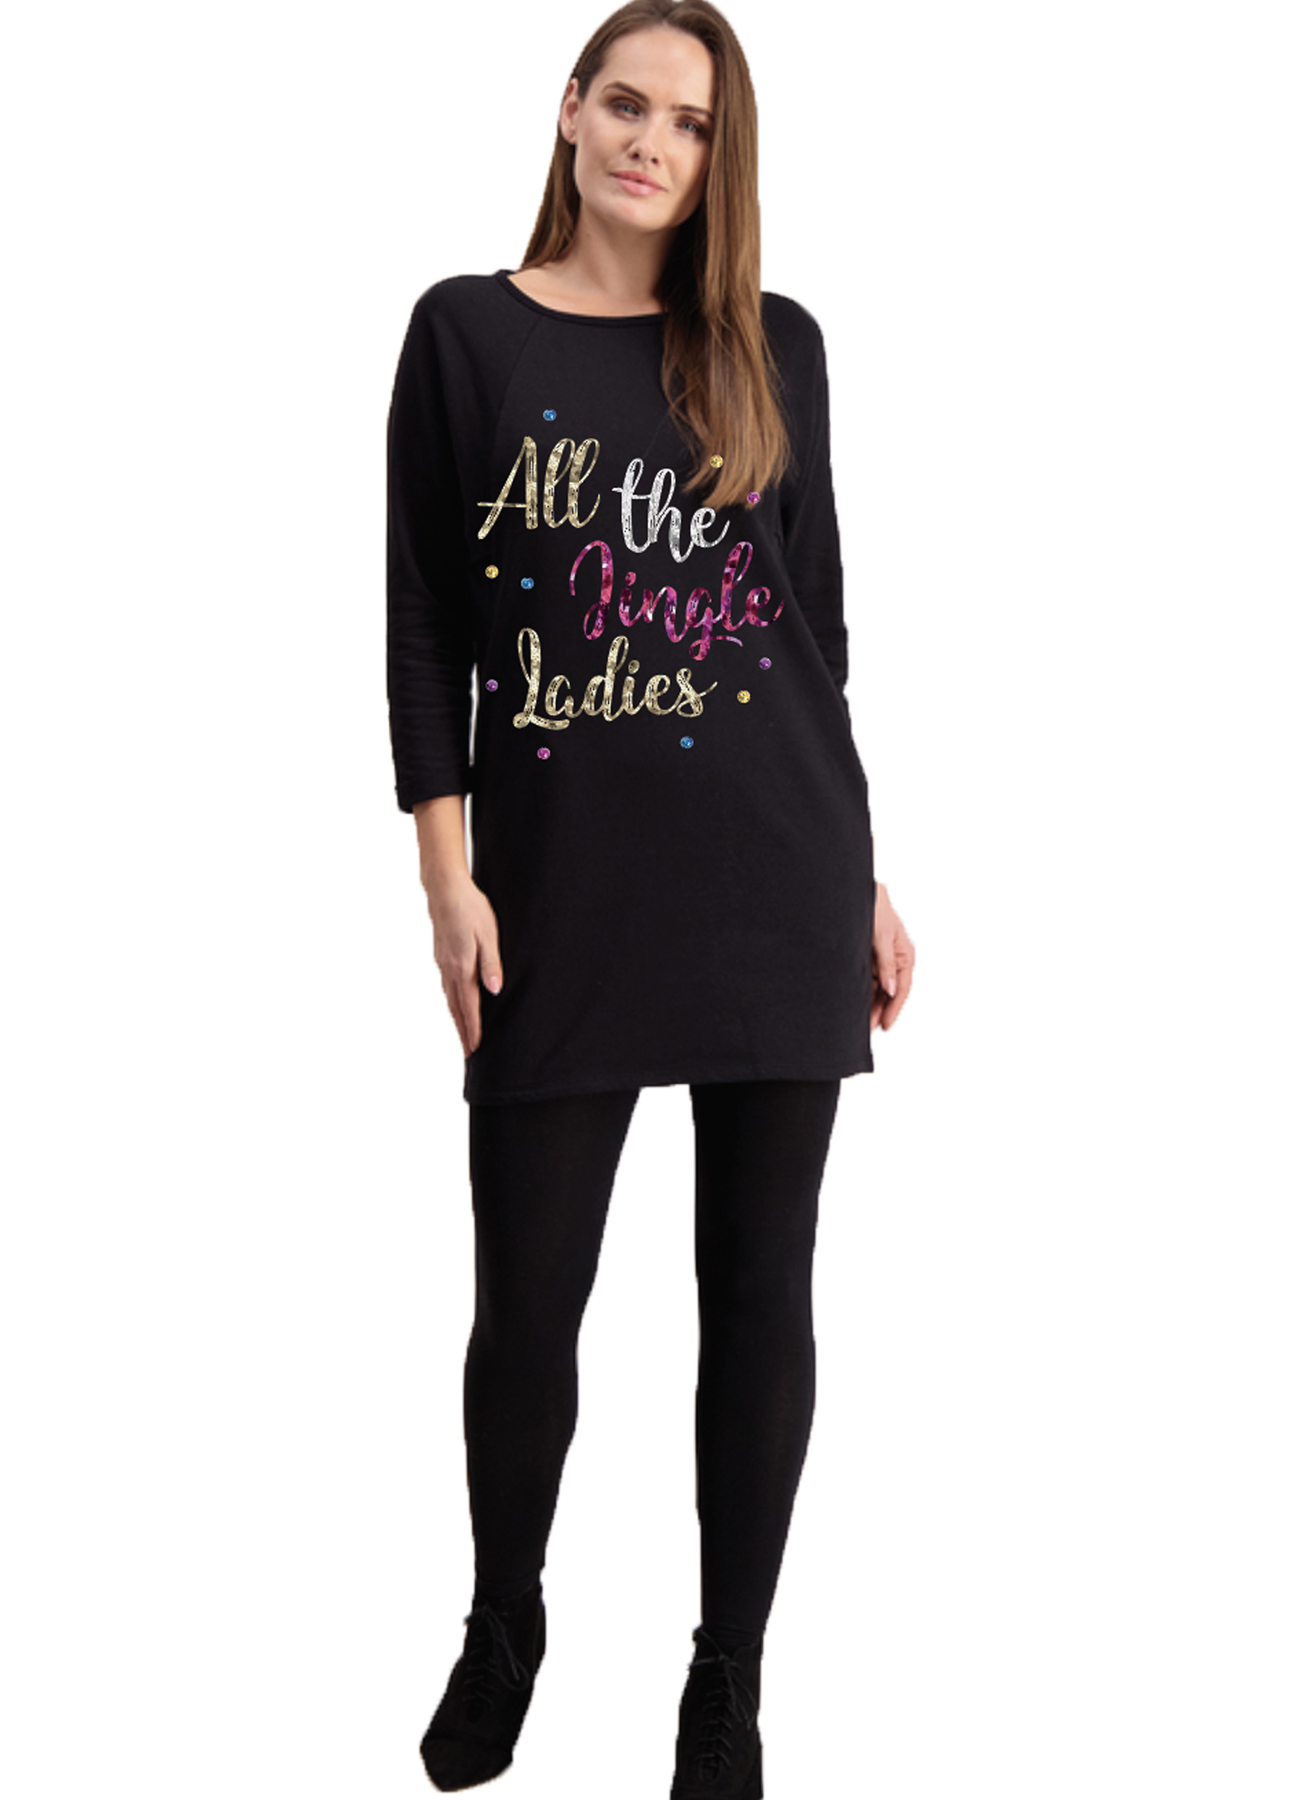 Buy > christmas tunic jumper > in stock